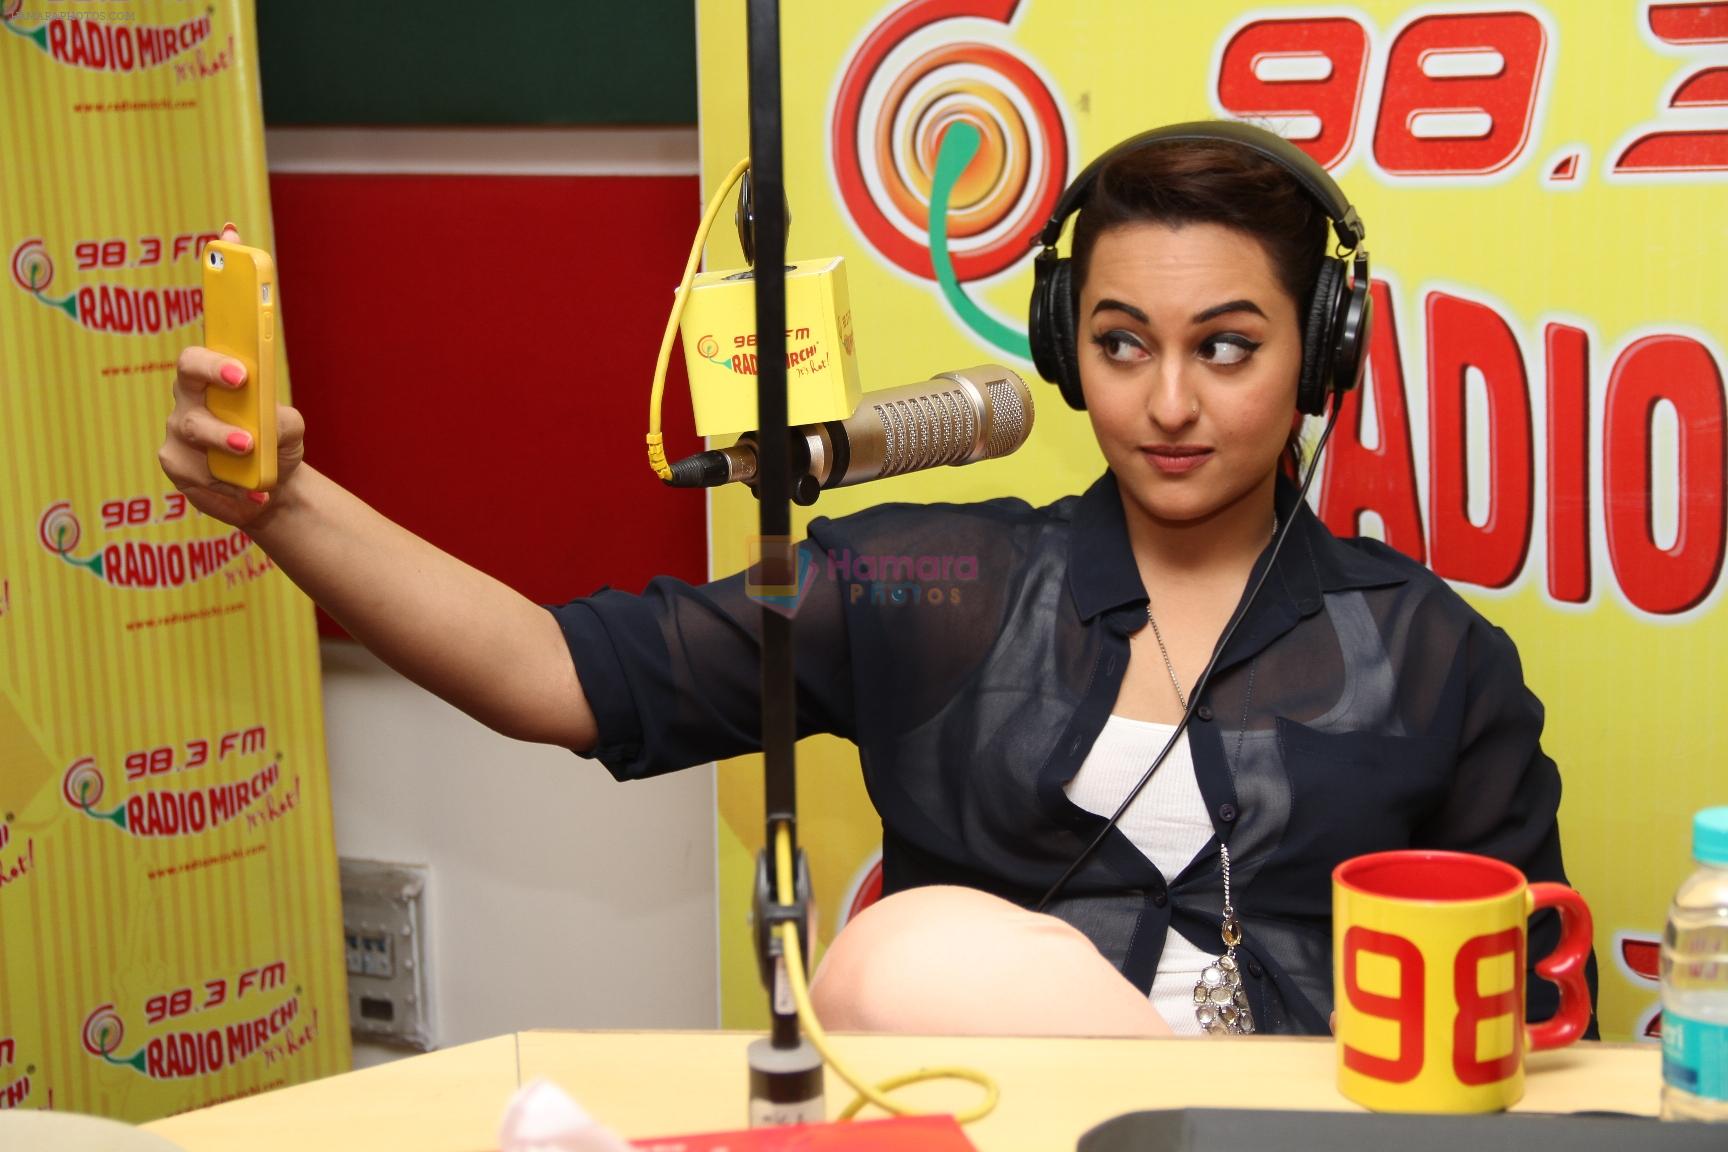 Trying to look preety even when on air - Sonakshi Sinha at Radio Mirchi Studio for promotion of her upcoming movie Lootera